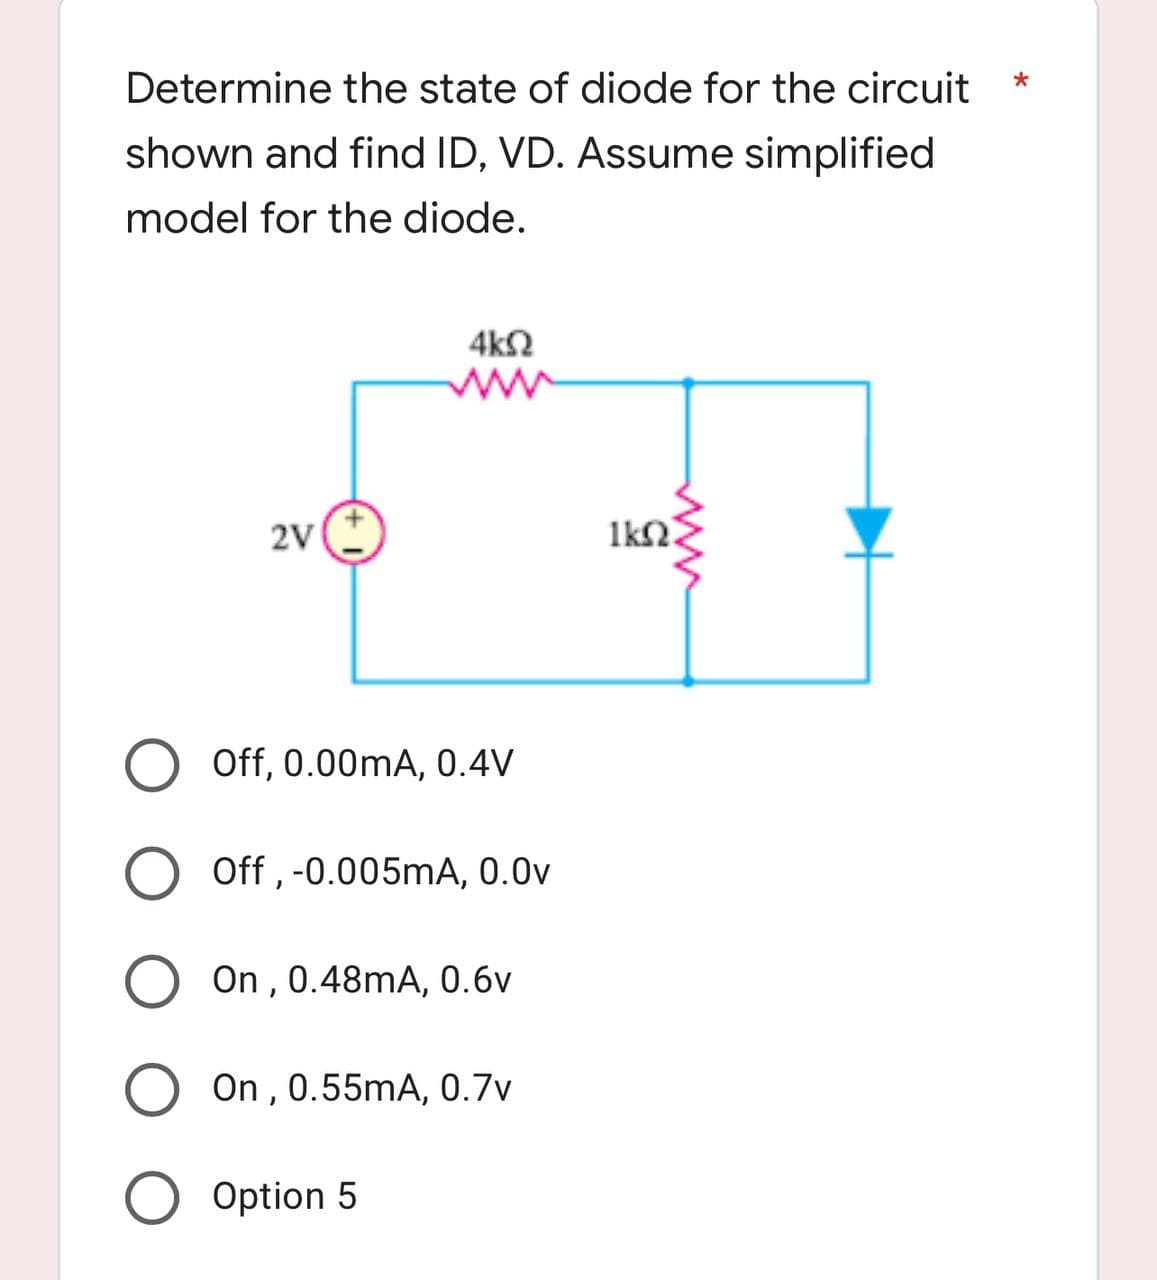 Determine the state of diode for the circuit
*
shown and find ID, VD. Assume simplified
model for the diode.
4ΚΩ
2V
Off, 0.00mA, 0.4V
Off, -0.005mA, 0.0v
On, 0.48mA, 0.6v
On, 0.55mA, 0.7v
O Option 5
www
1k02